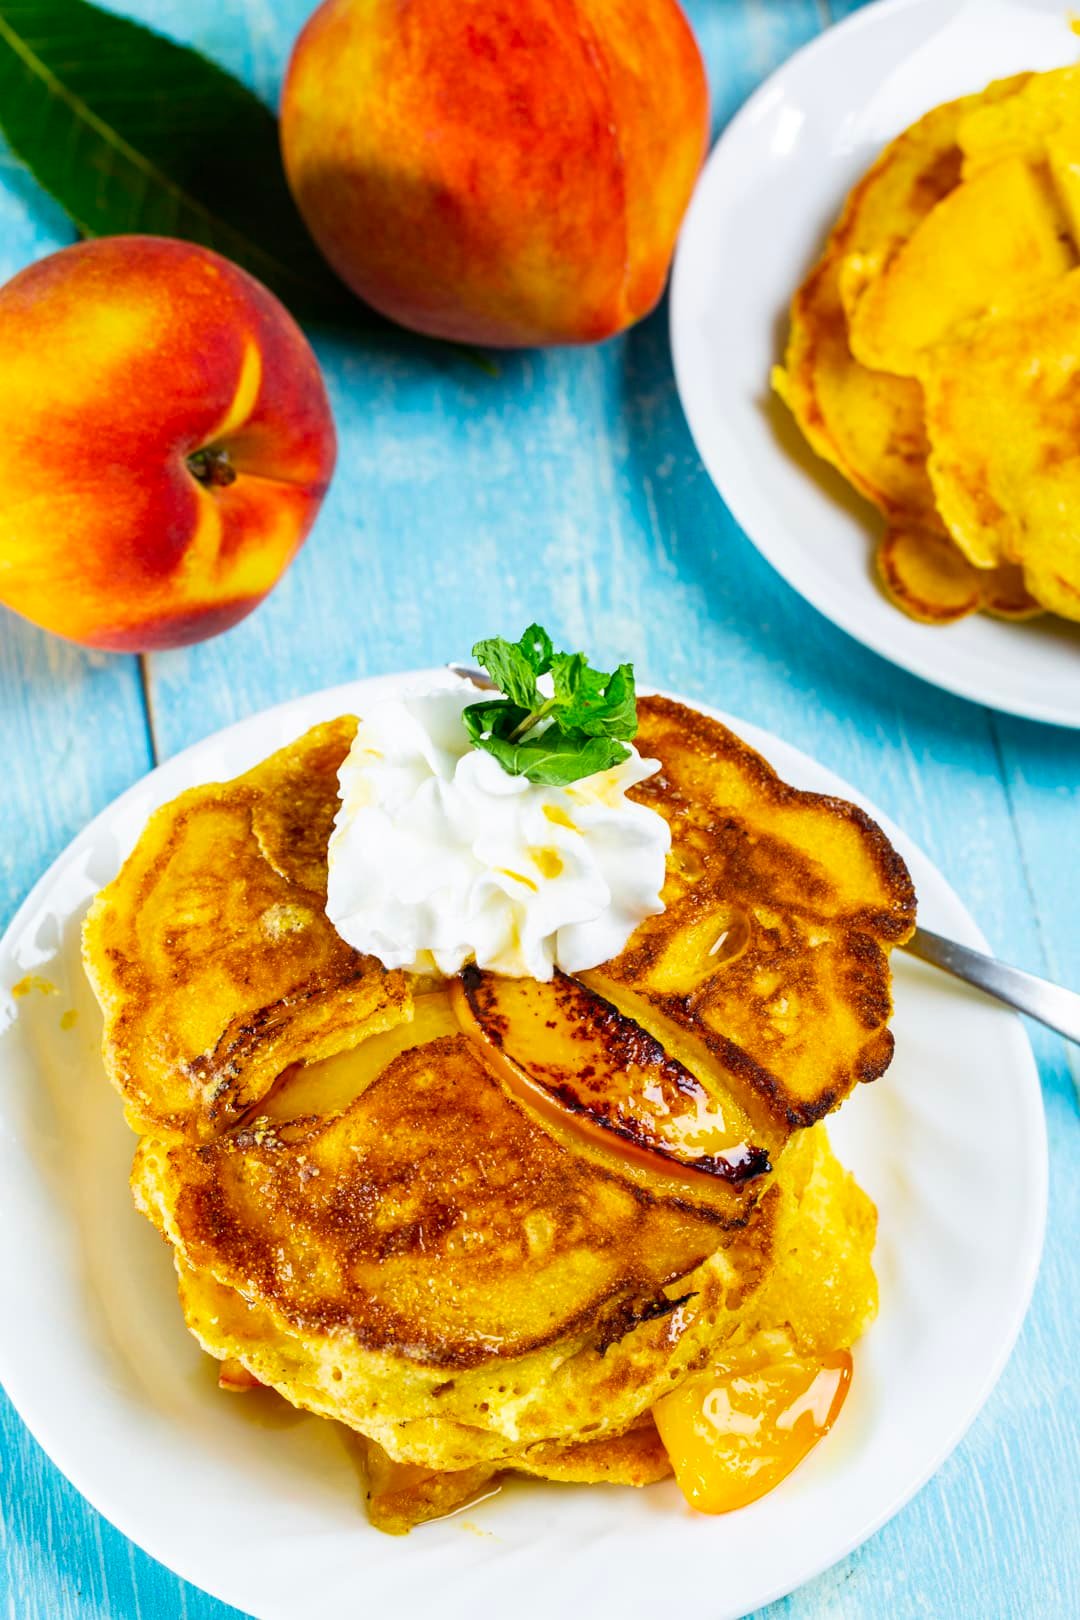 Pancakes stacked on a plate surrounded by fresh peaches.